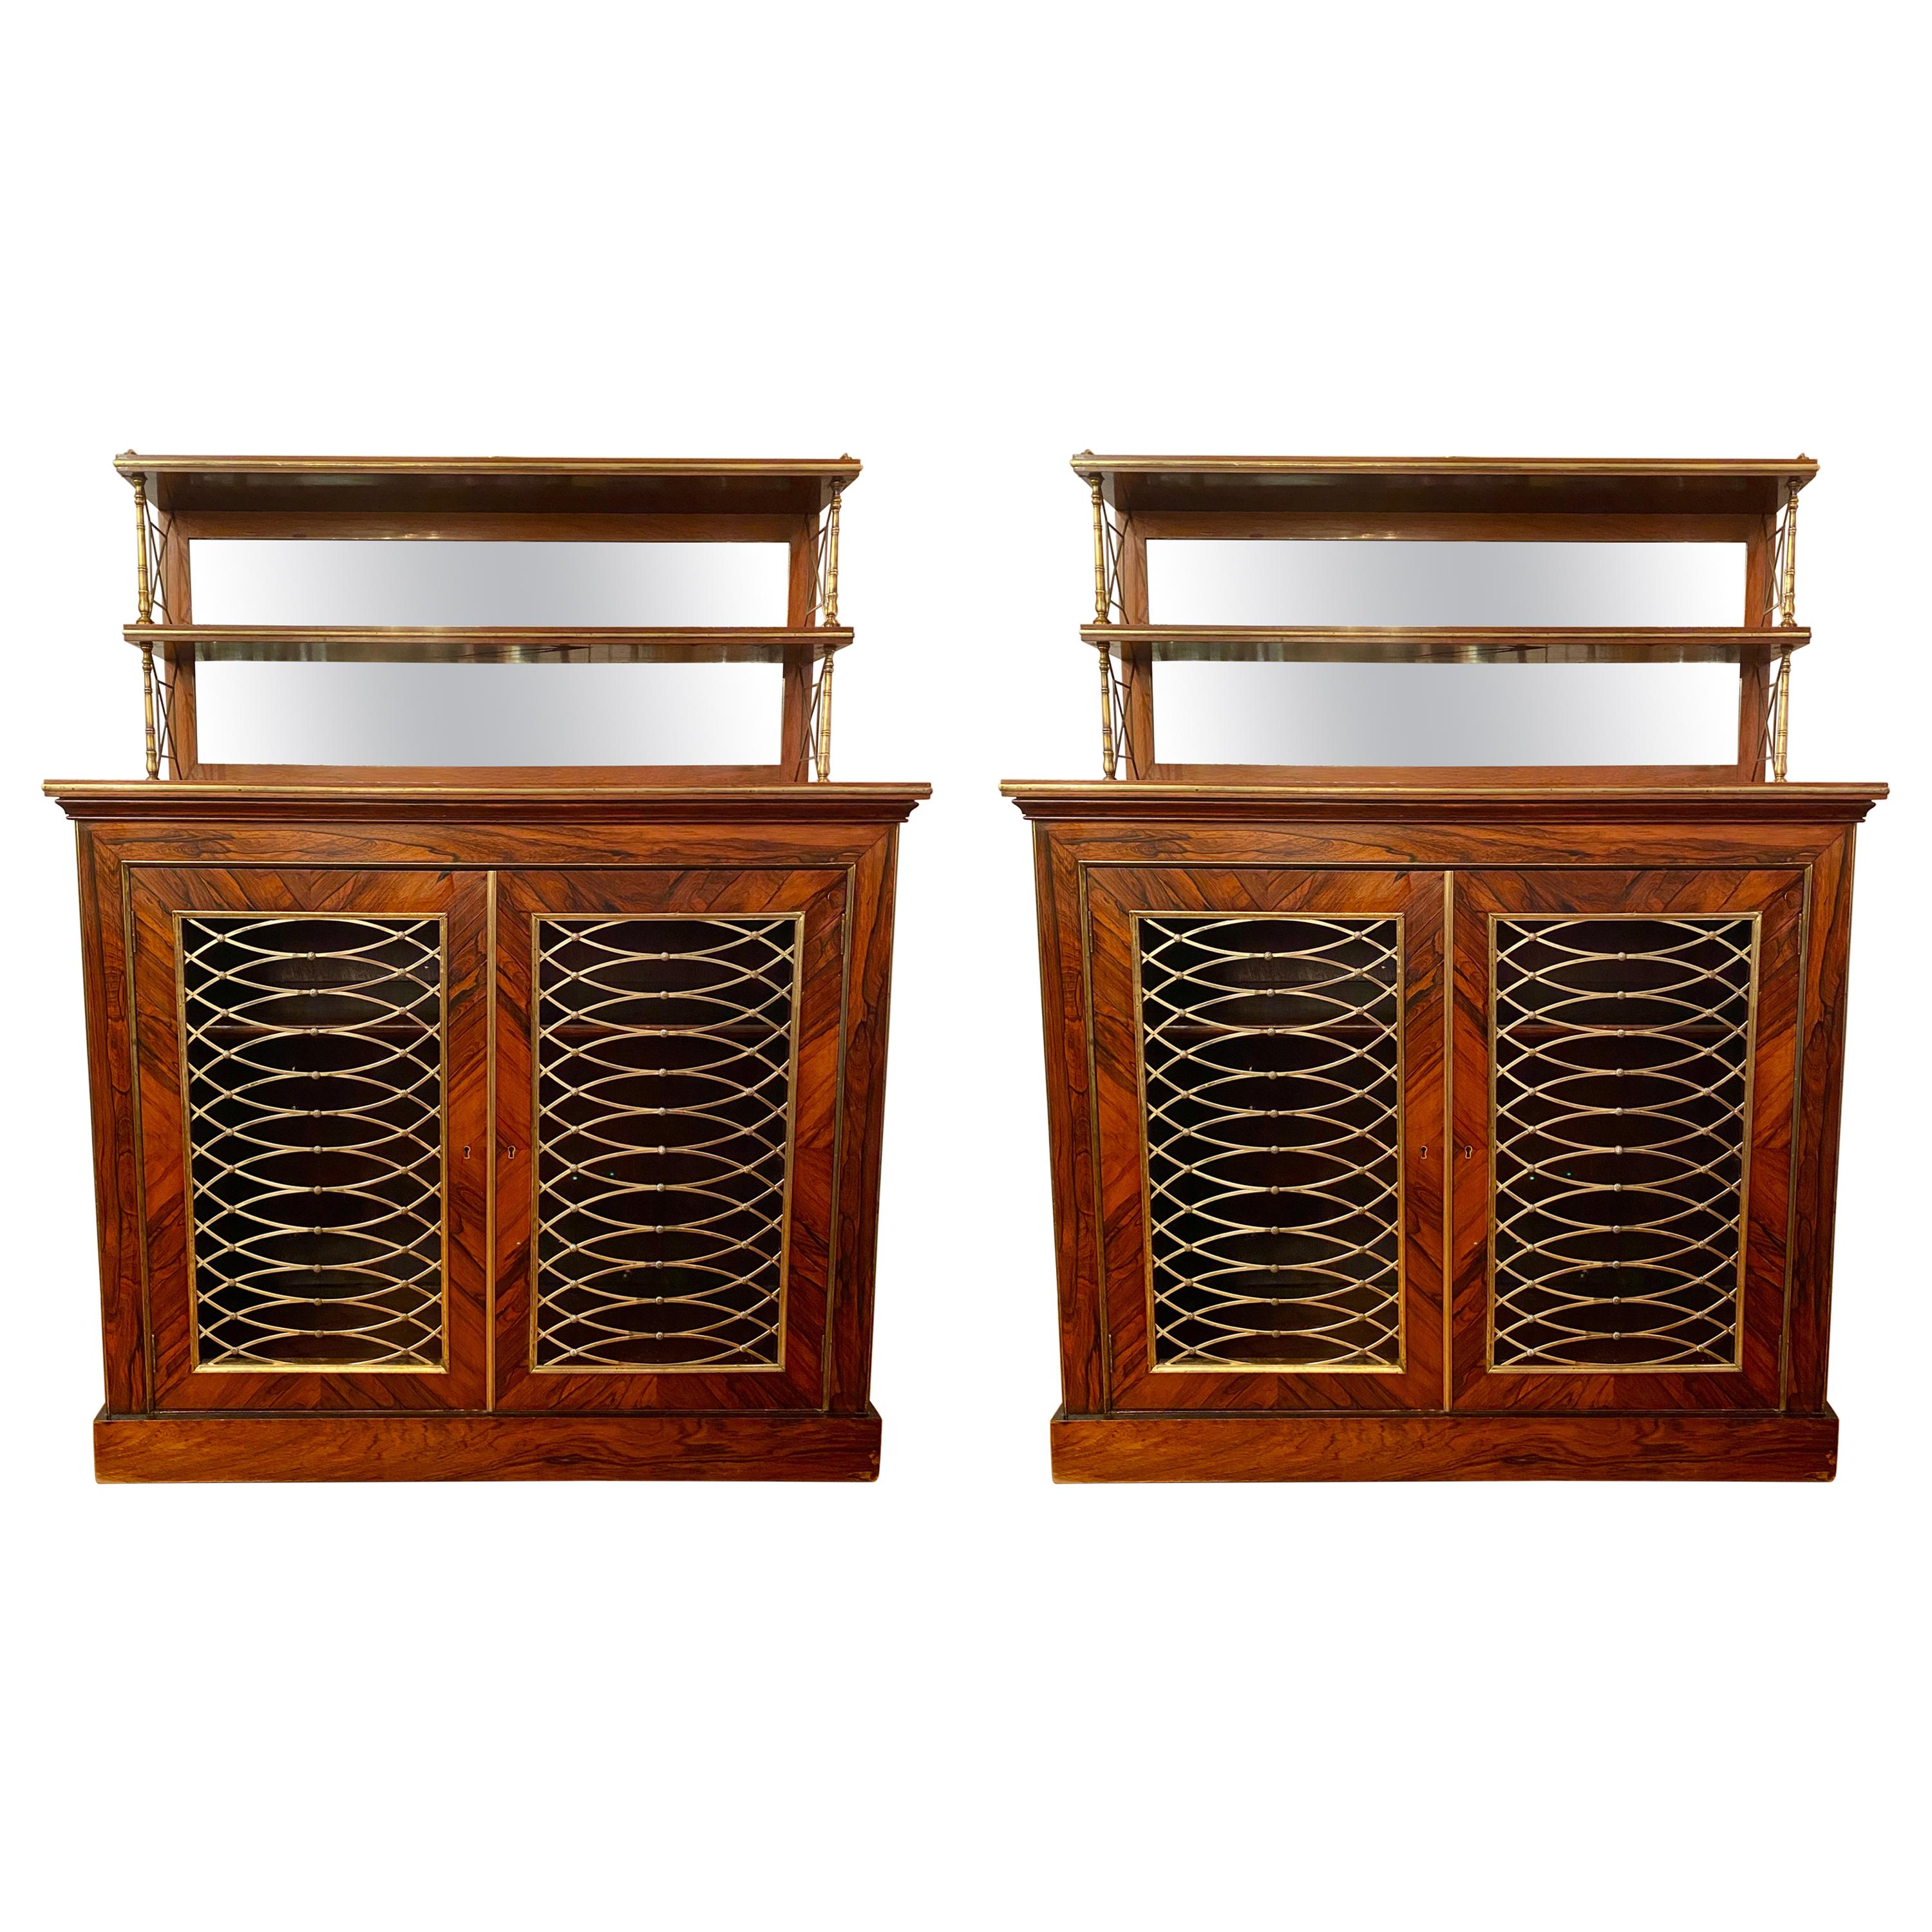 Pair of Antique English Regency Rosewood Cabinets, Circa 1880's For Sale